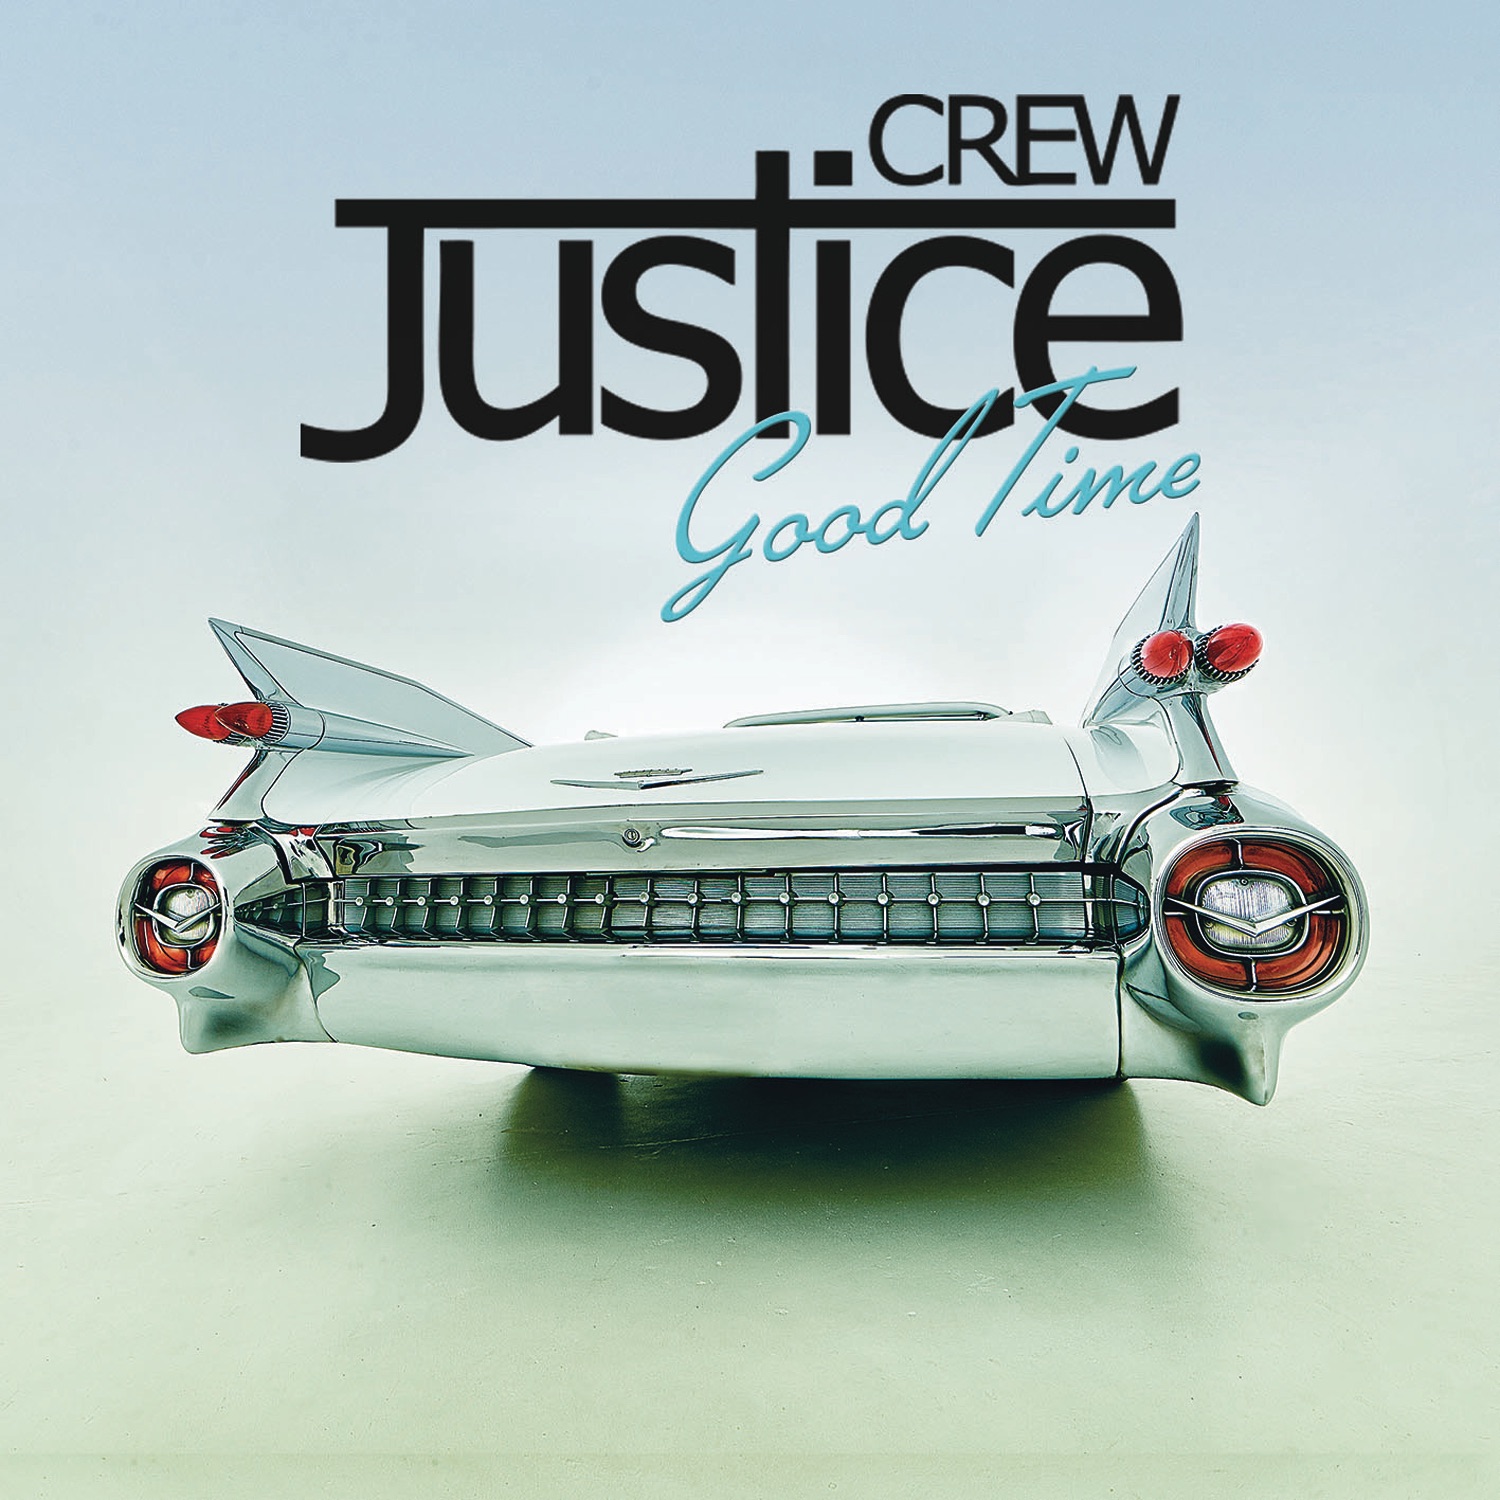 Good Time - Single by Justice Crew on iTunes